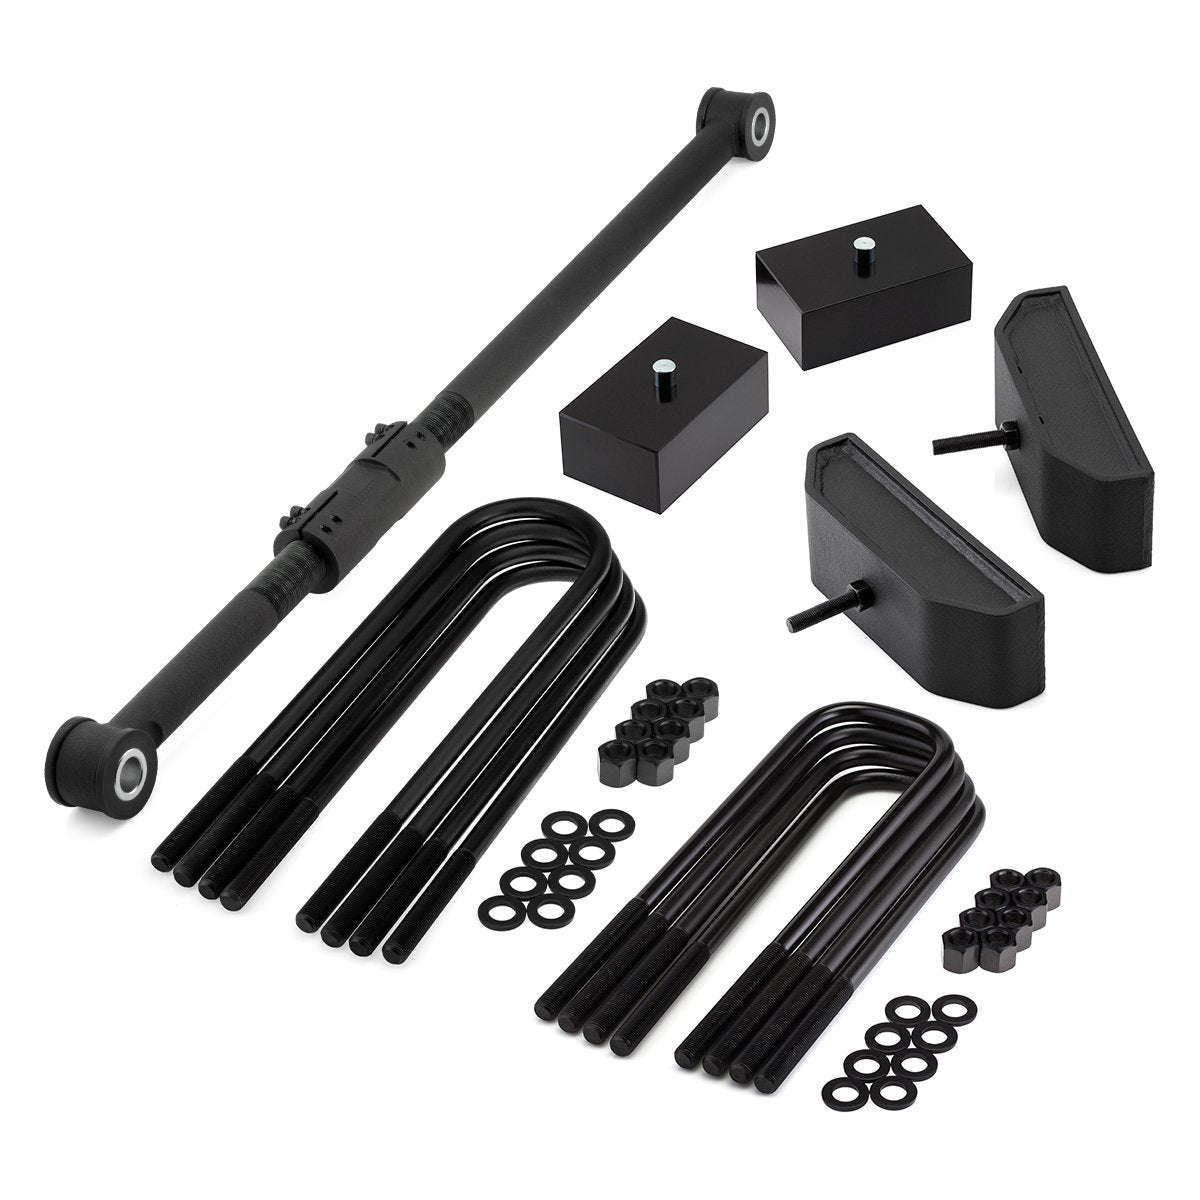 1999-2004 Ford F-350 Super Duty 4WD Full Suspension Lift Kit with Adjustable Track Bar